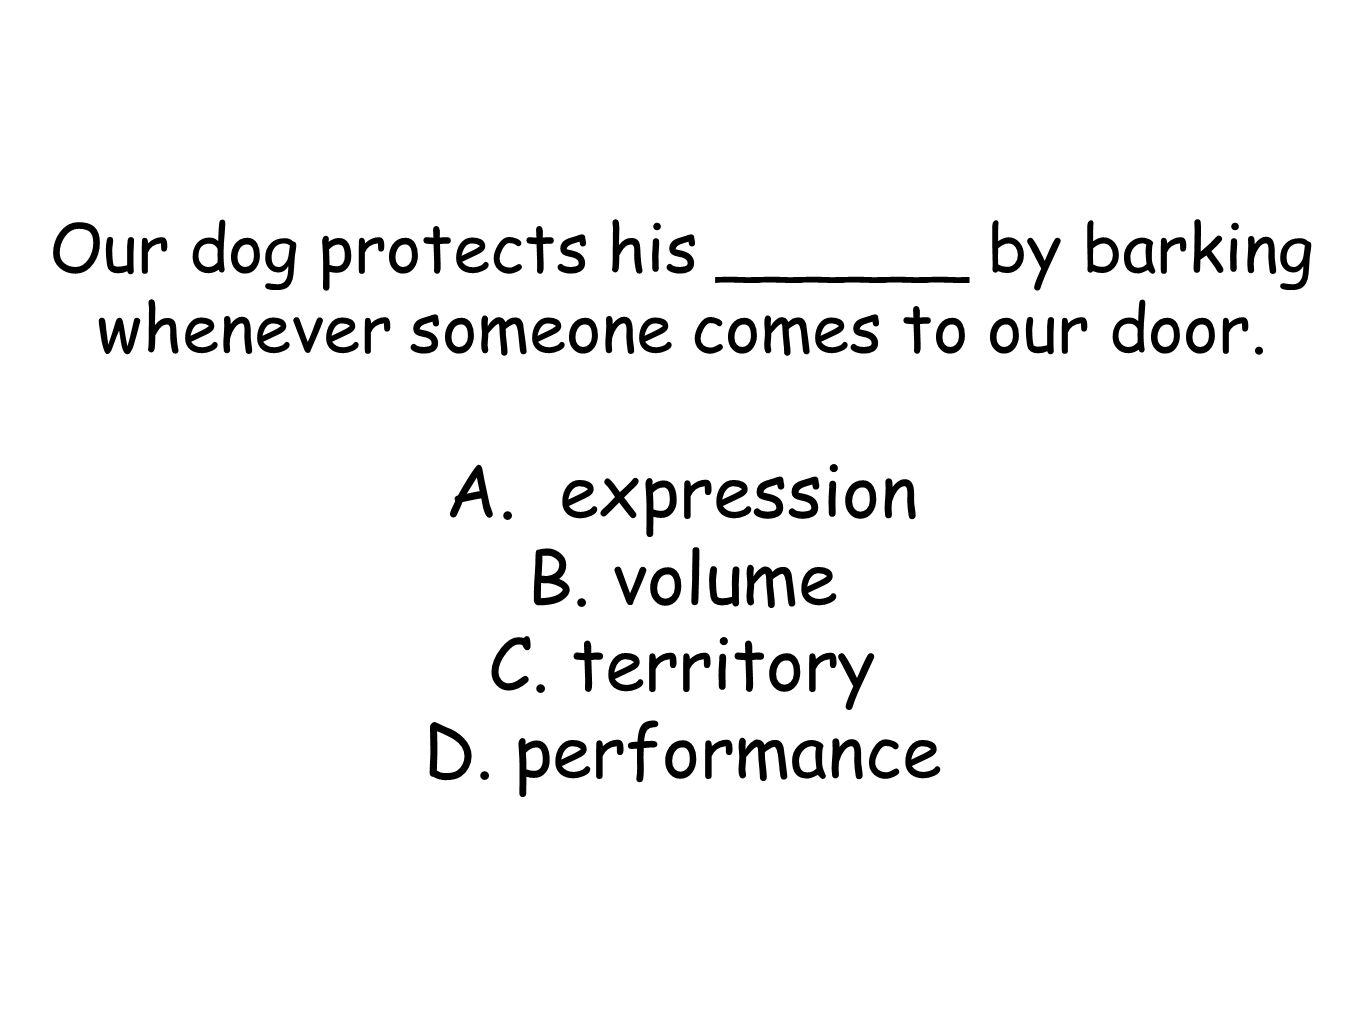 Our dog protects his ______ by barking whenever someone comes to our door.